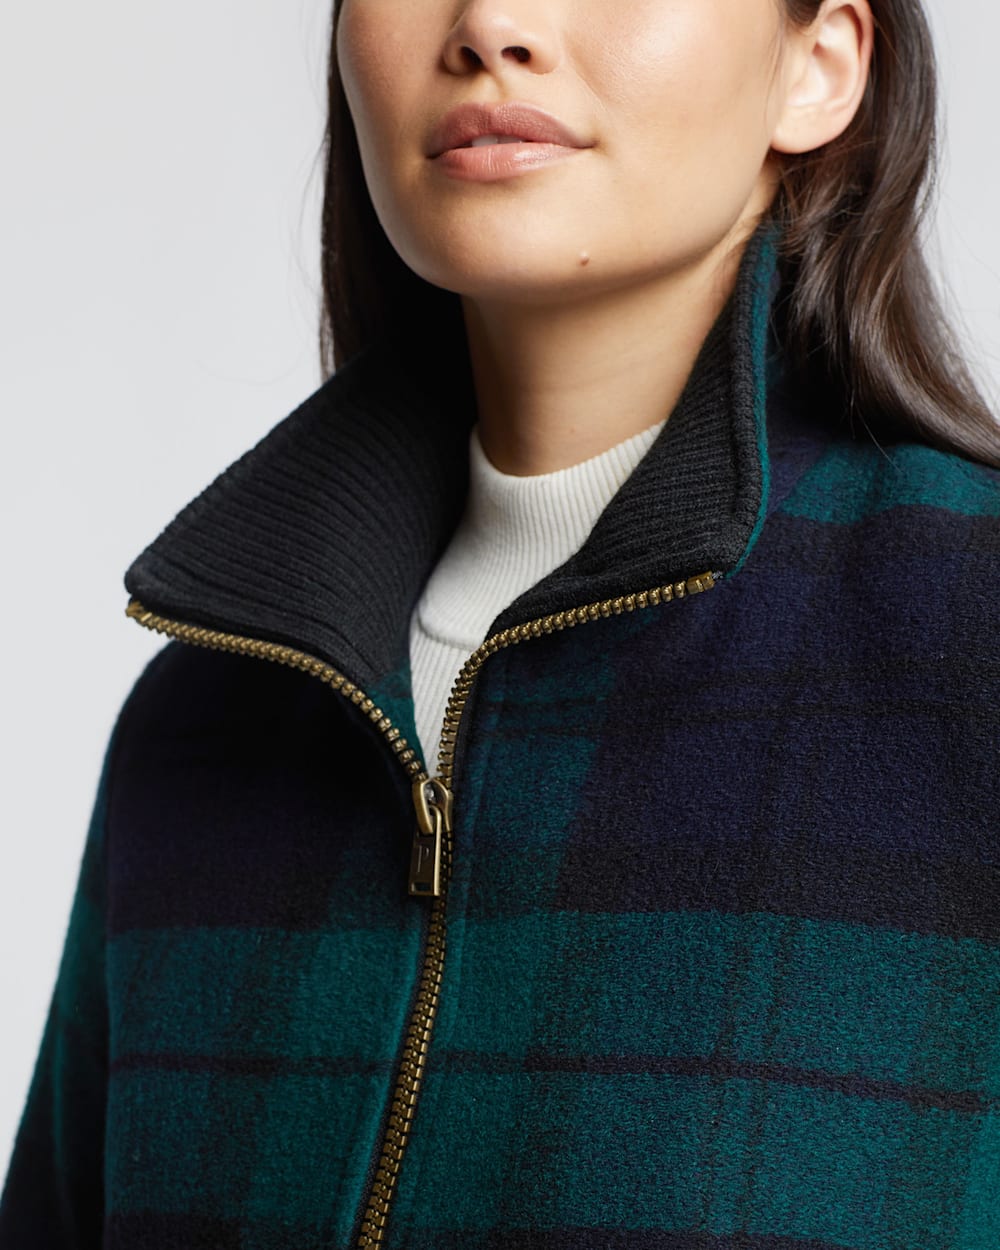 ALTERNATE VIEW OF WOMEN'S CAMDEN TOPPER COAT IN BLACK WATCH PLAID image number 4